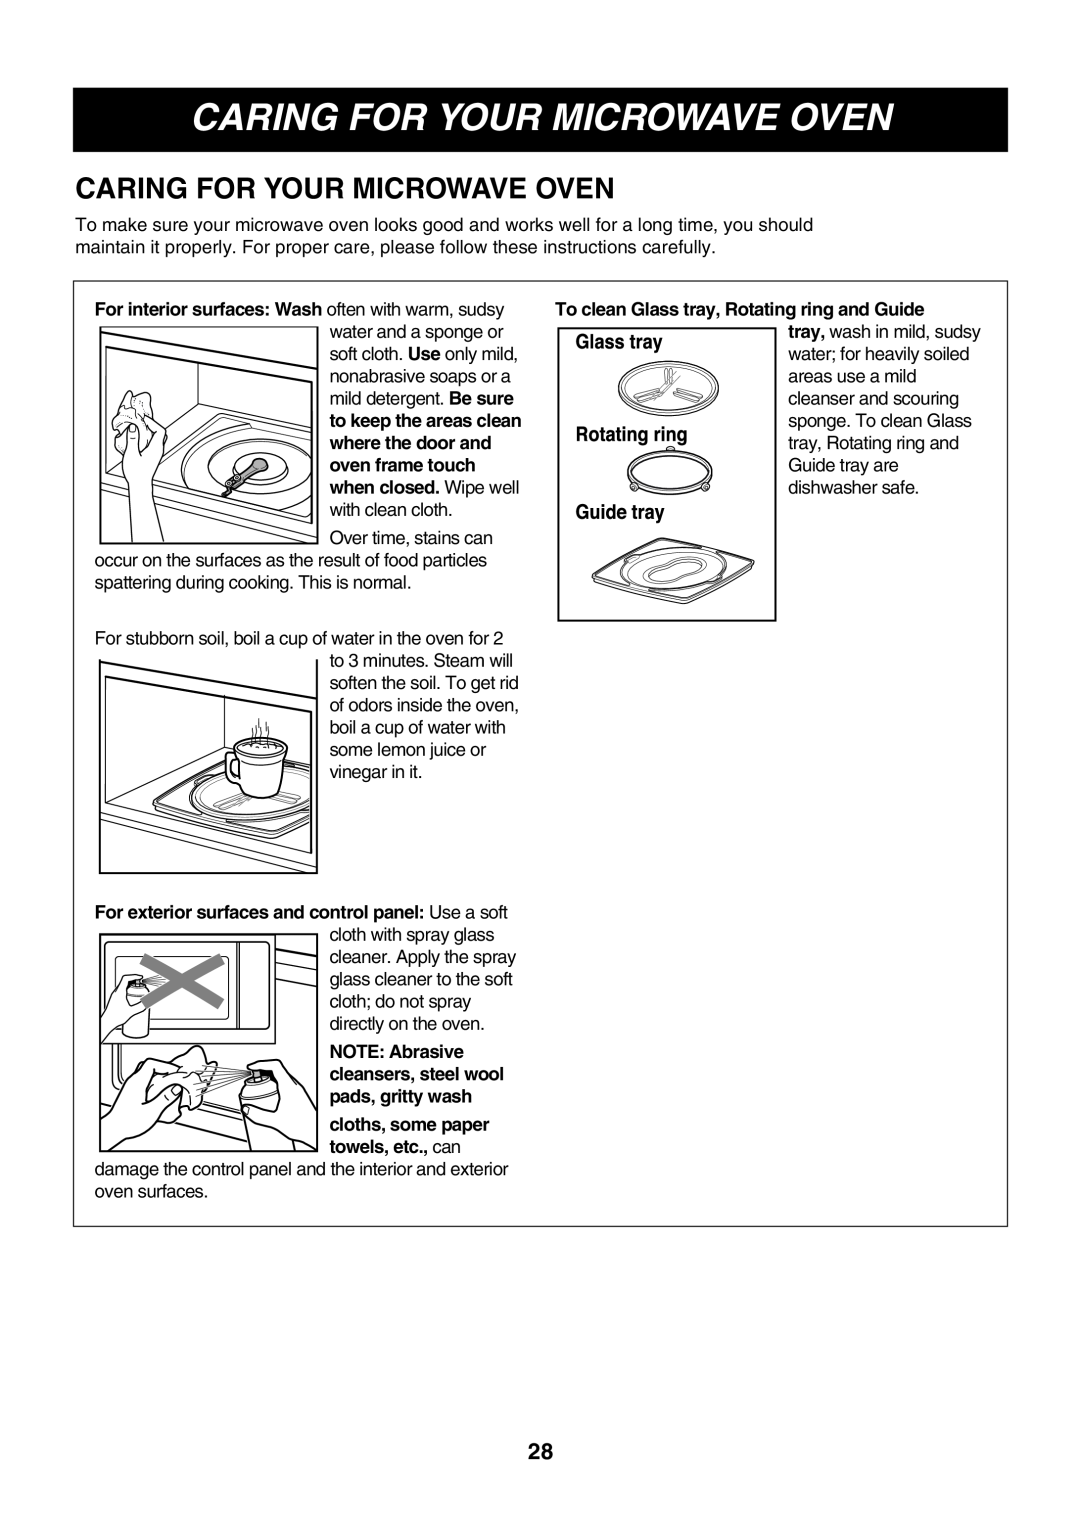 Minolta LMVM2085SB owner manual Caring For Your Microwave Oven 